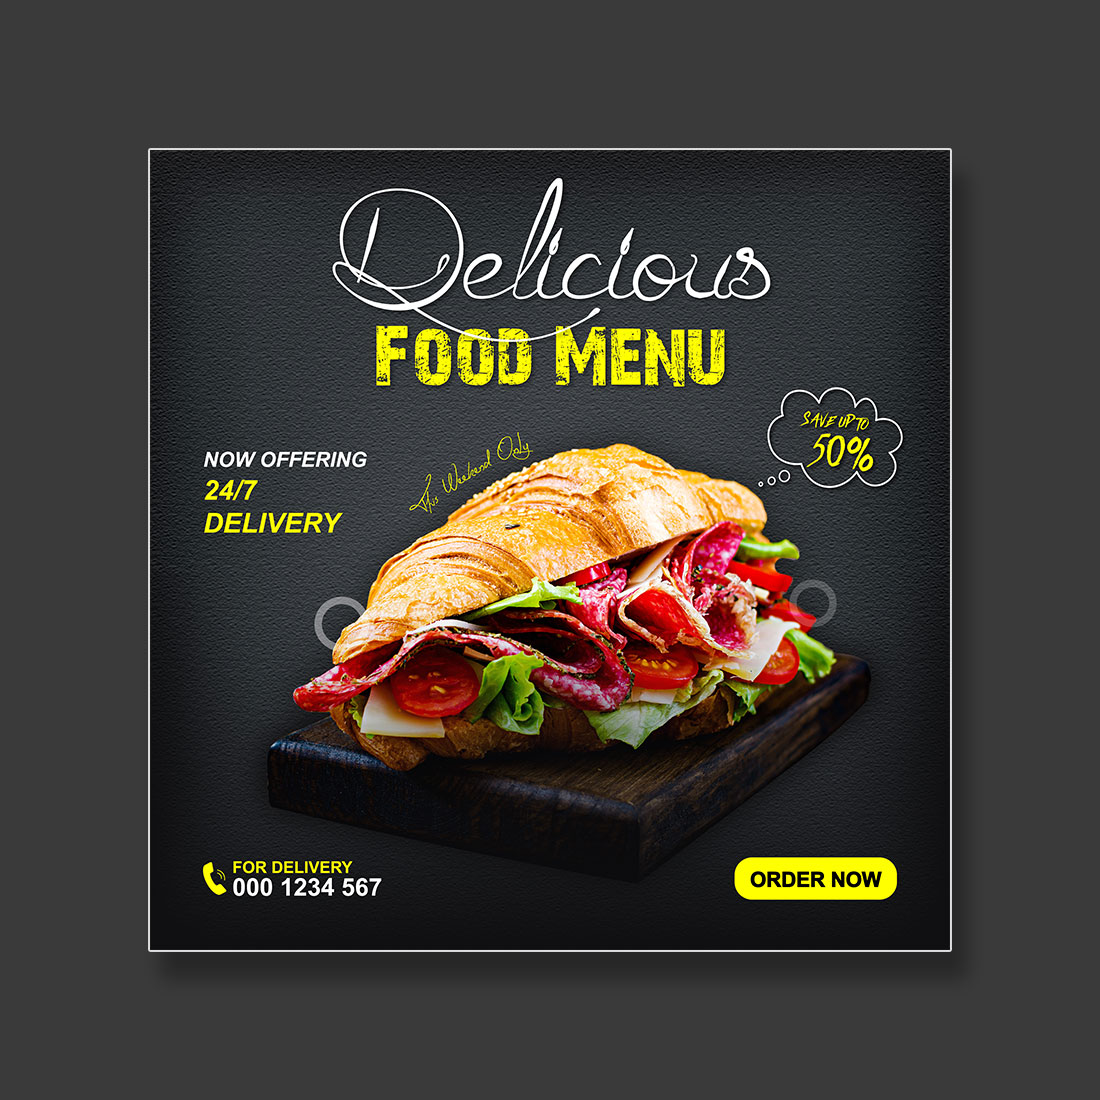 Delicious food menu social media promotion template preview image.